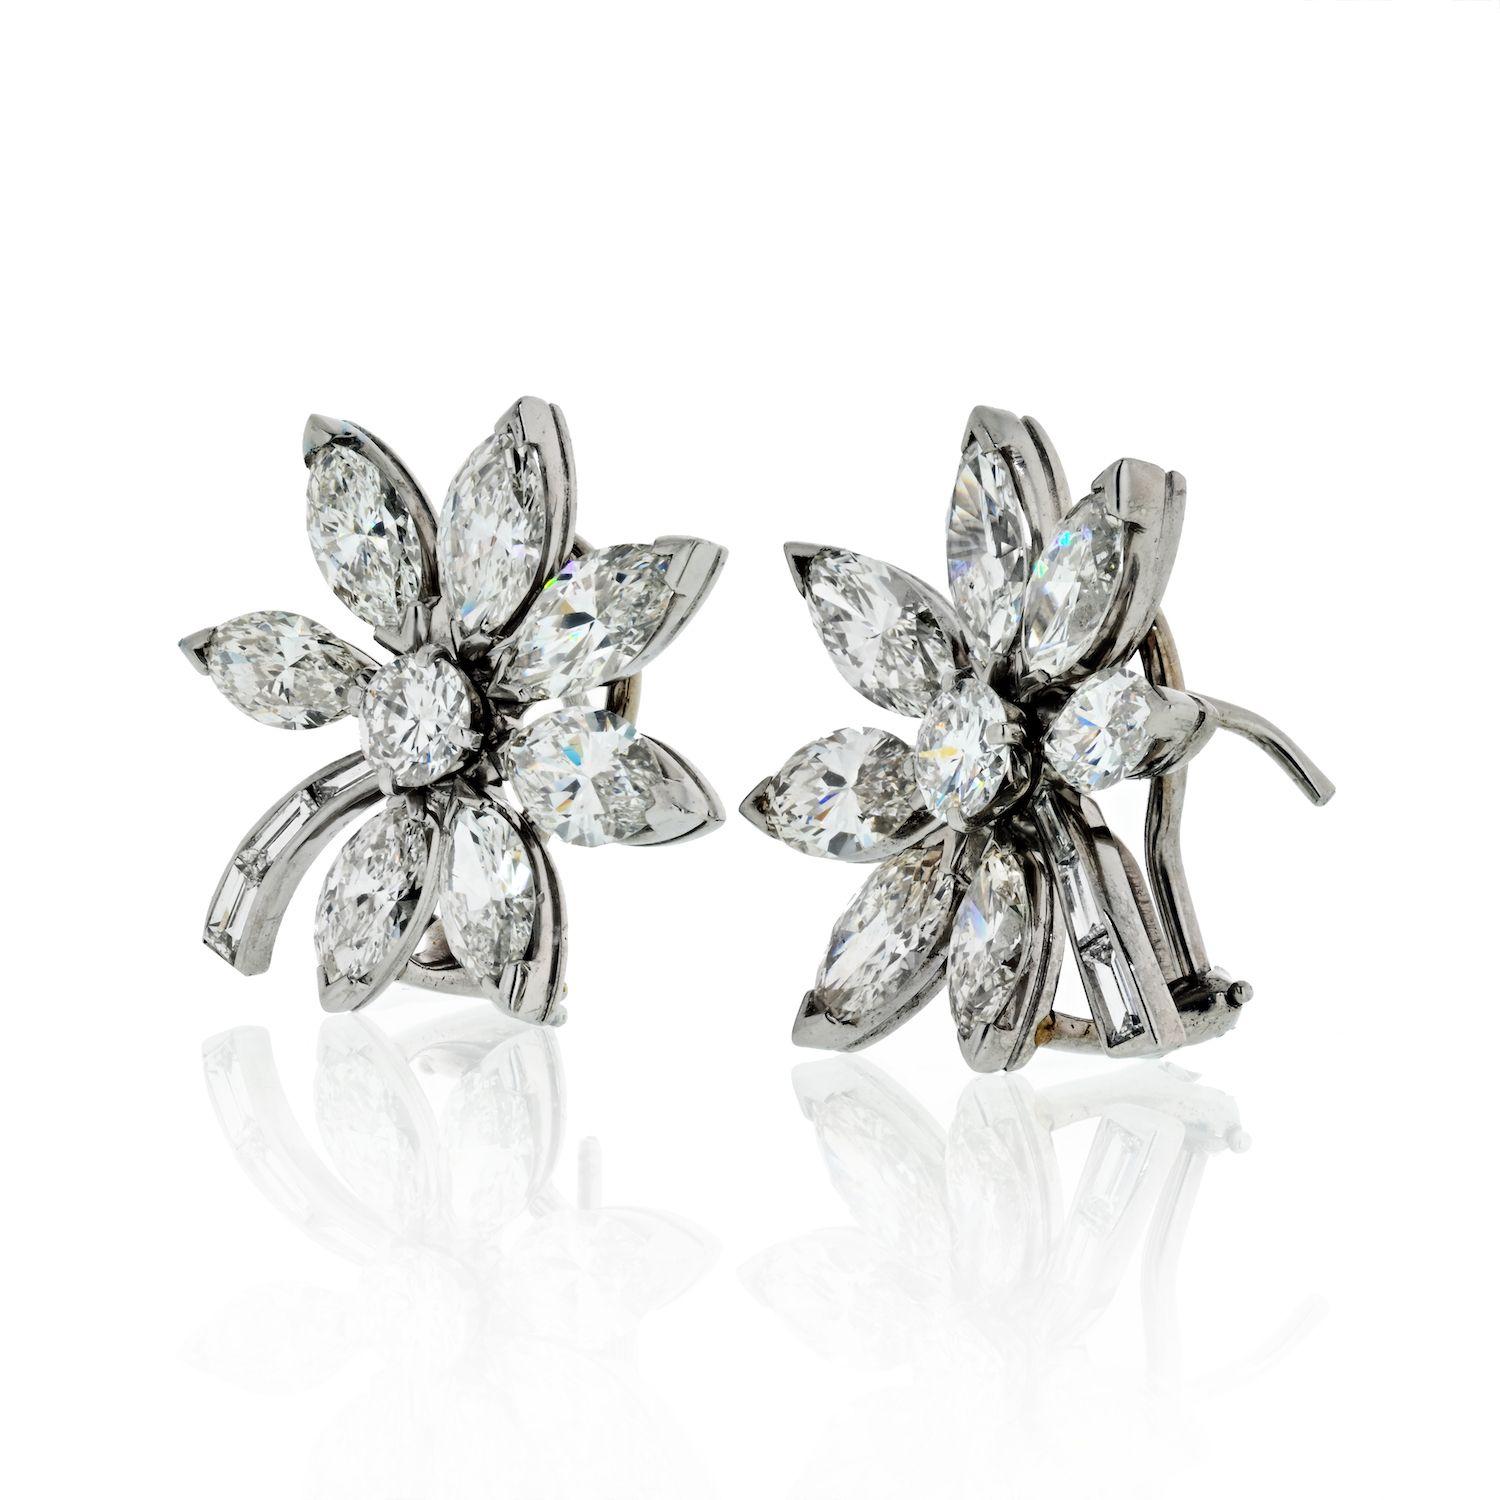 Round and marquise shaped diamond earrings from our starflower collection in platinum. Made with 14 marquise cut diamonds, 2 round cut diamonds and 6 baguette cuts. 
Total carat of these vintage earrings is 11.30cts (approx.)
Post back with omega